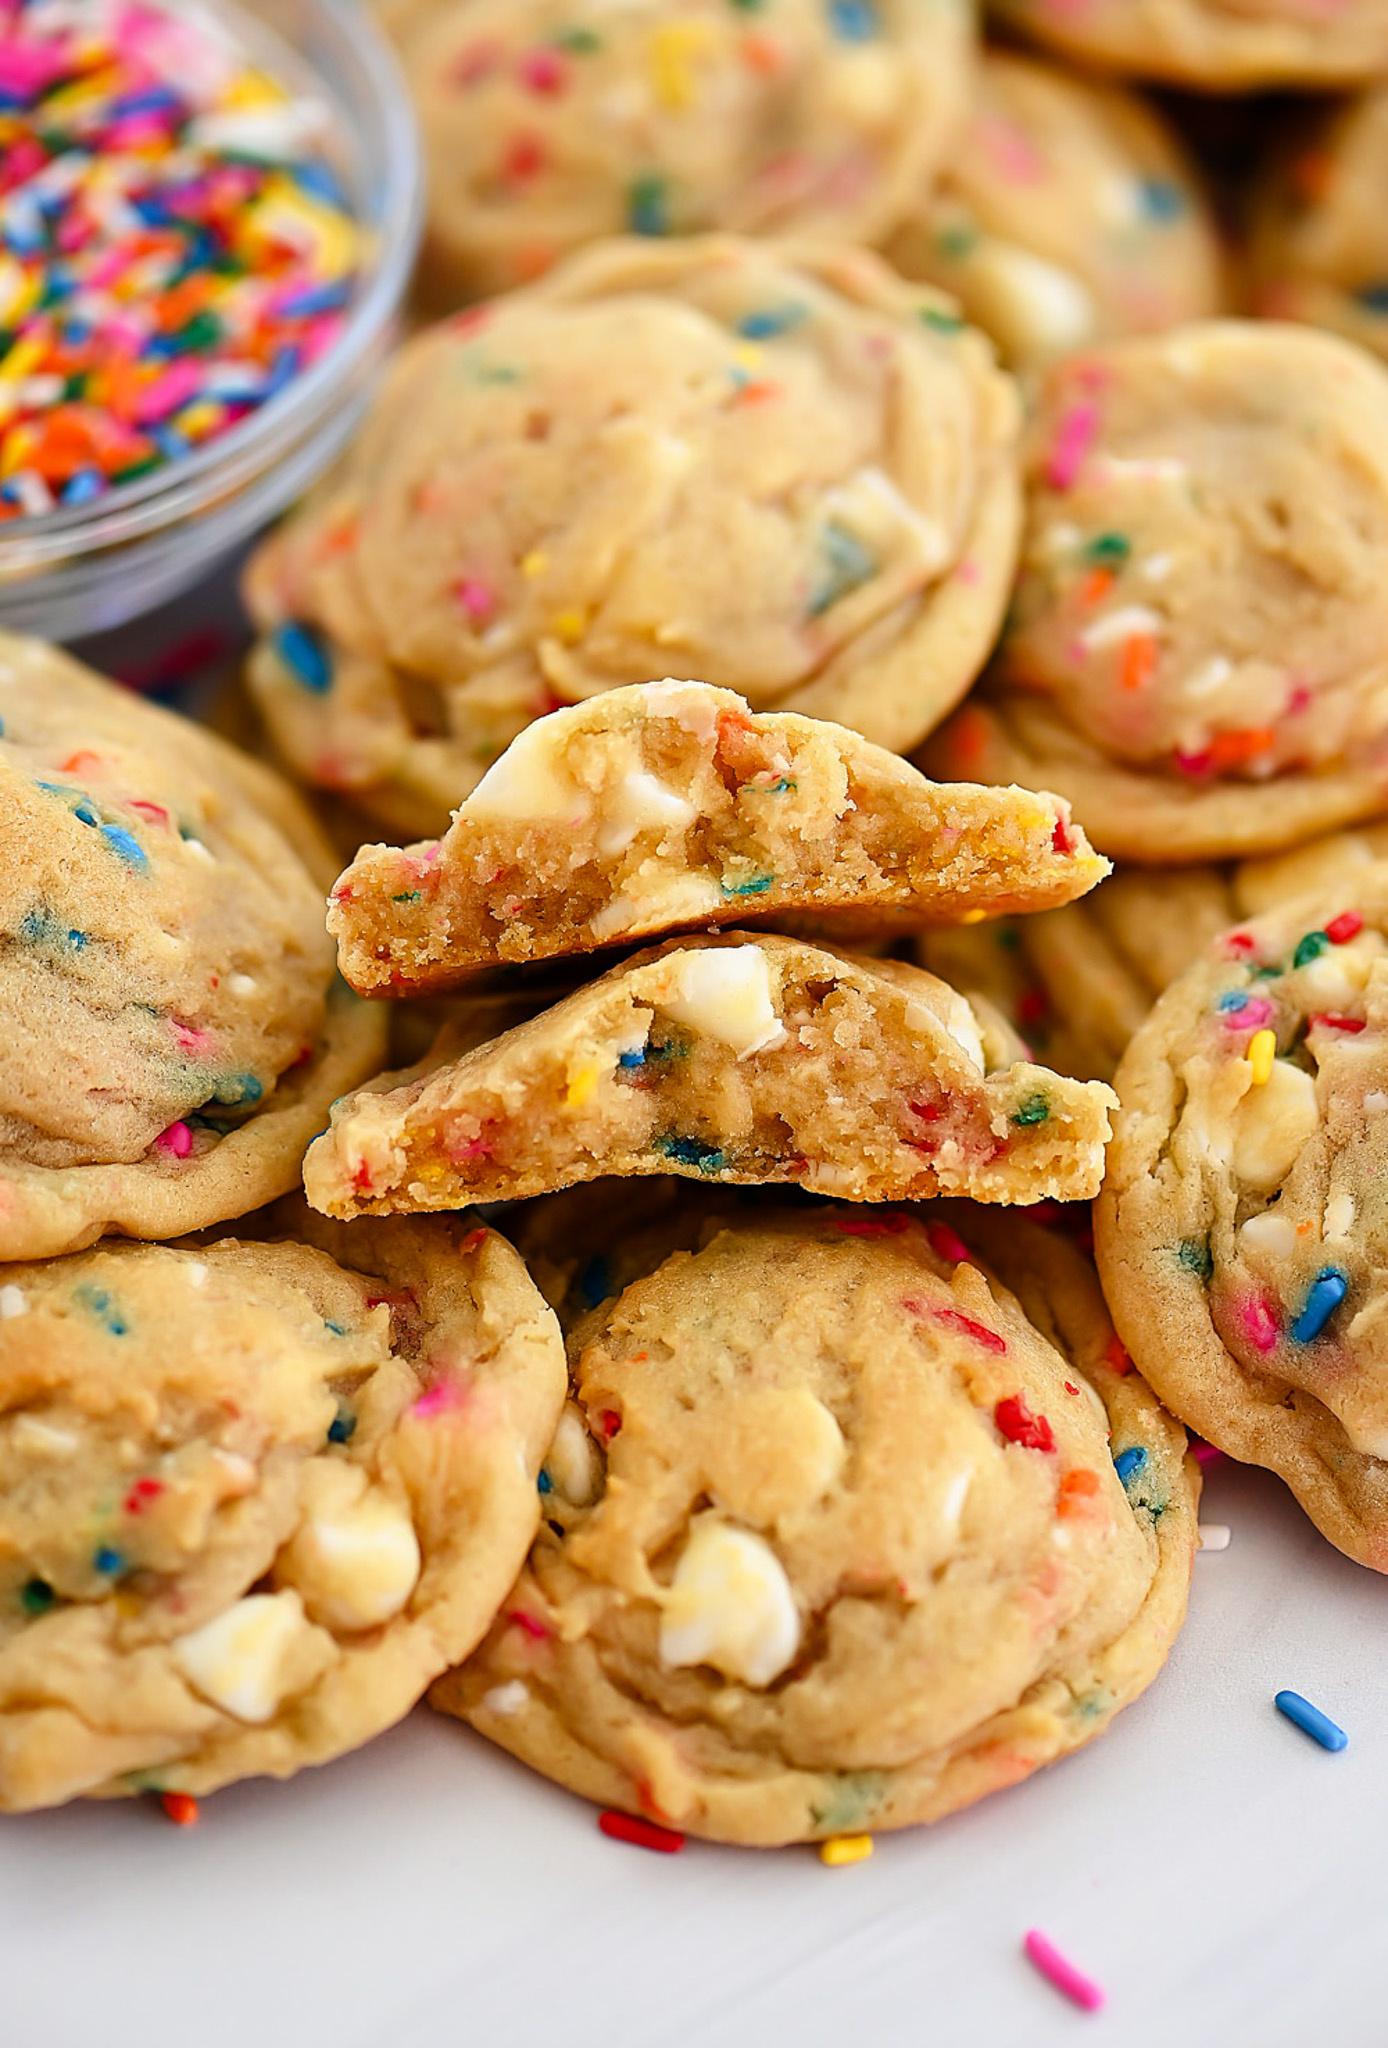 Cheesecake Pudding Cookies with Sprinkles